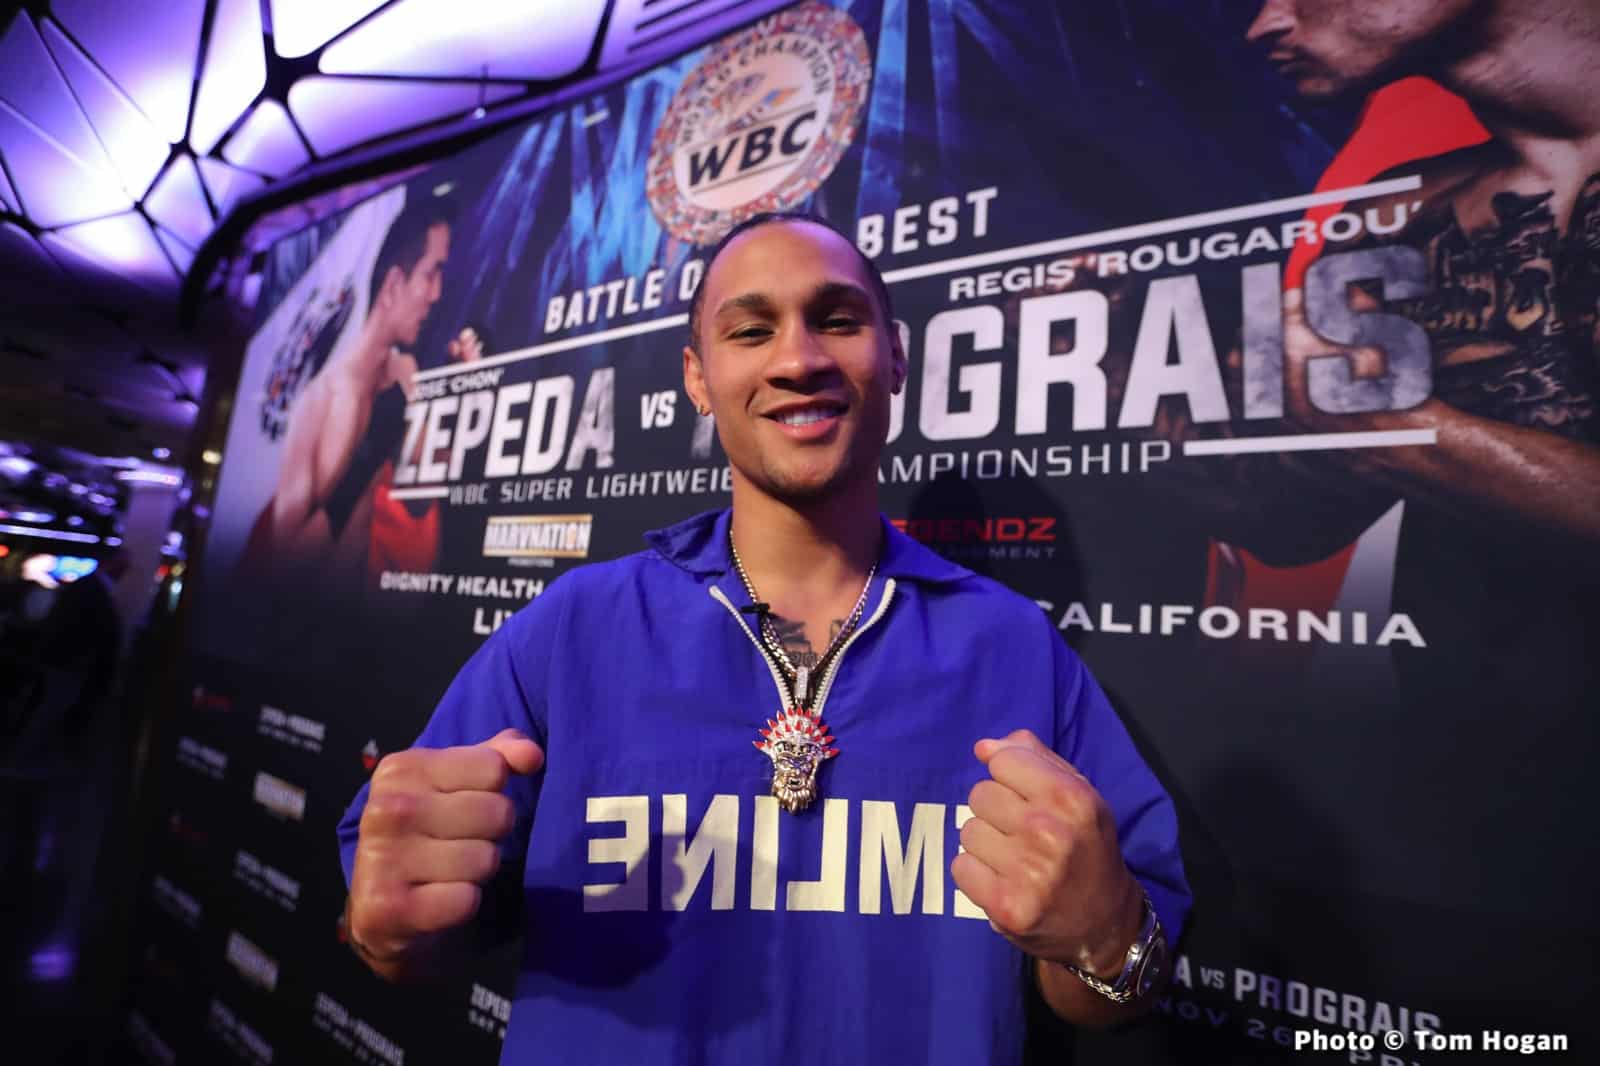 Prograis vs. Zepeda Ordered To Fight For Vacant WBC 140 Pound Belt